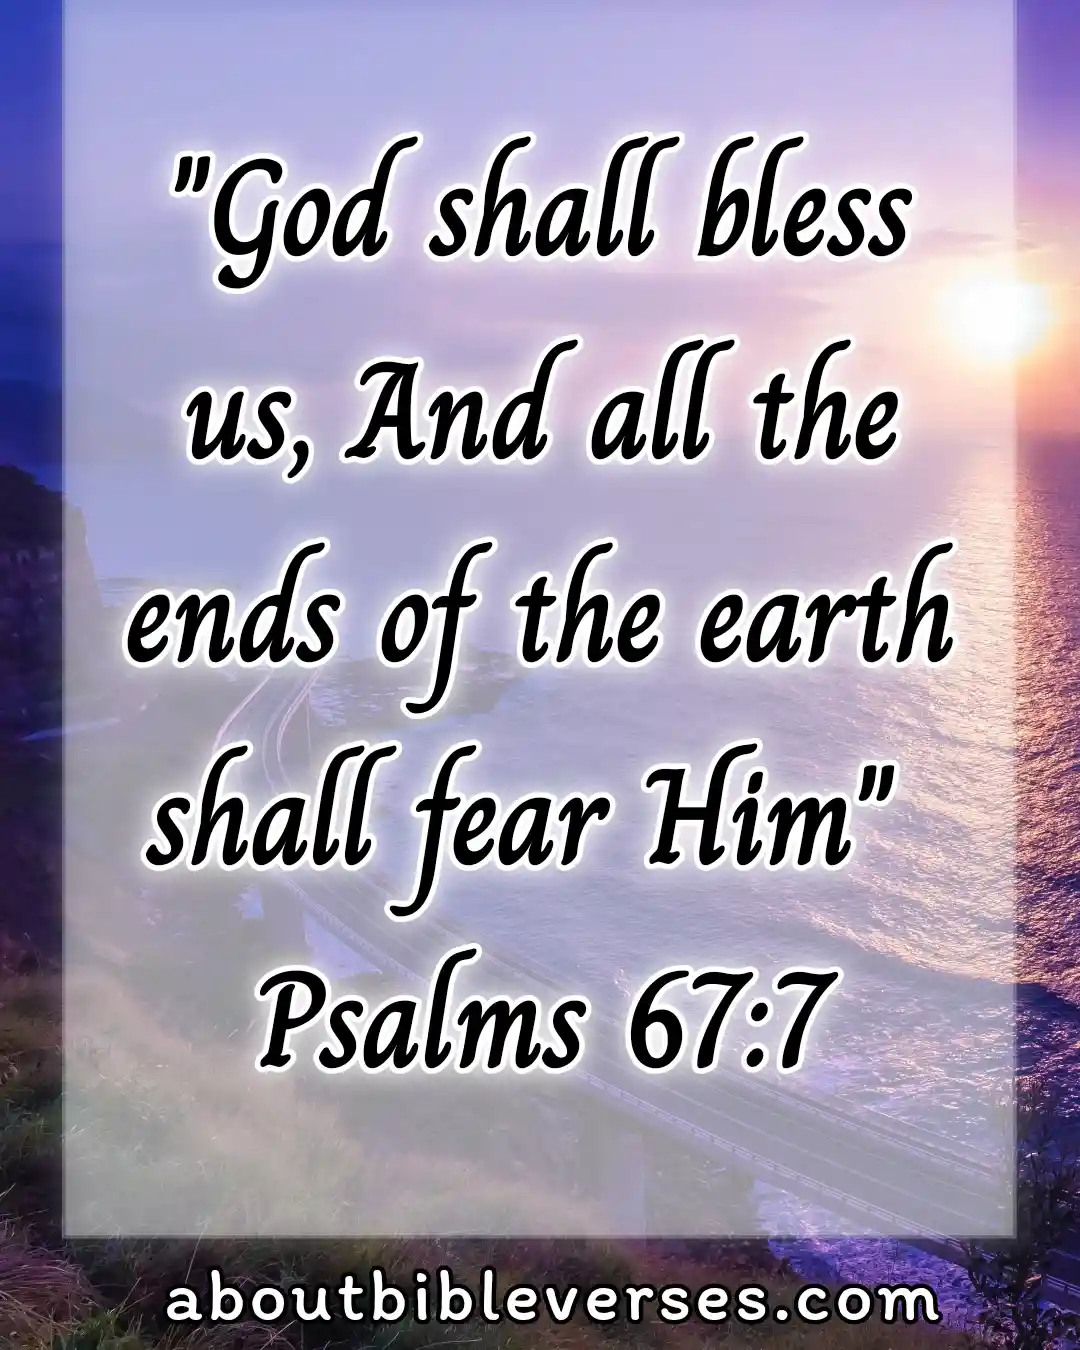 Monday Blessings Bible Verses (Psalm 67:7)